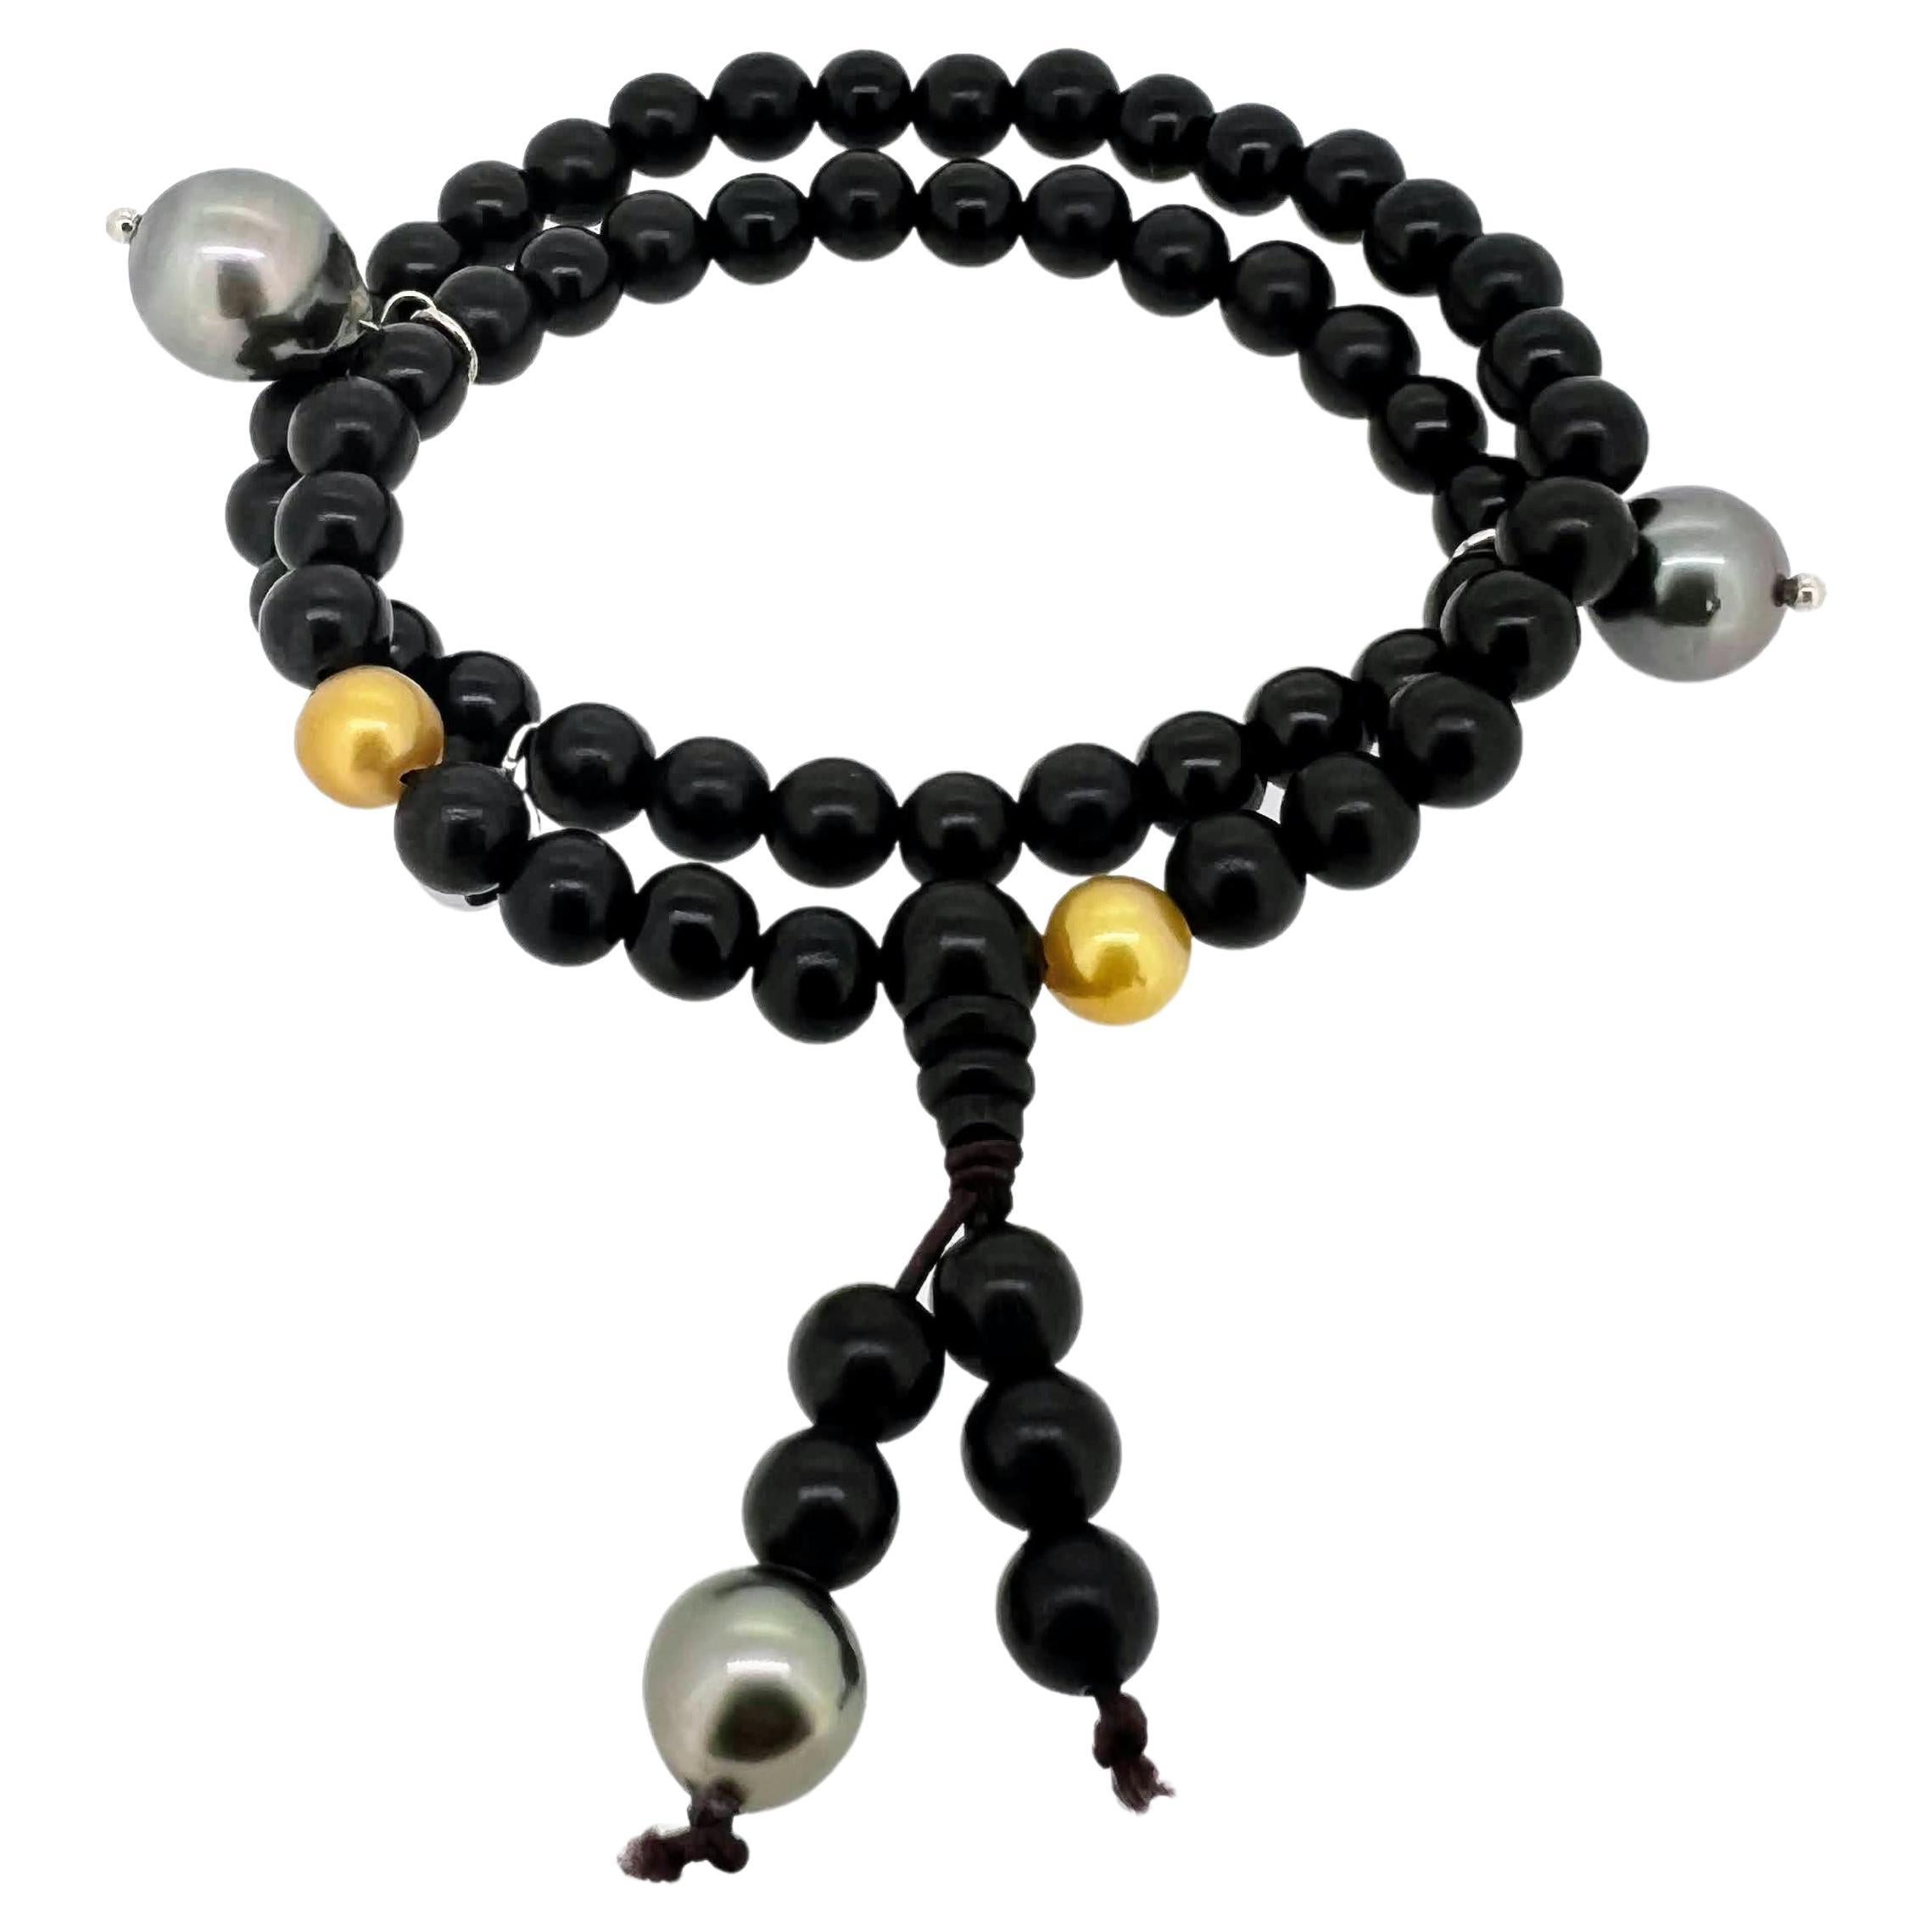 Prayer bracelet/necklace with ebony beads, Golden South Sea and Tahiti pearls For Sale